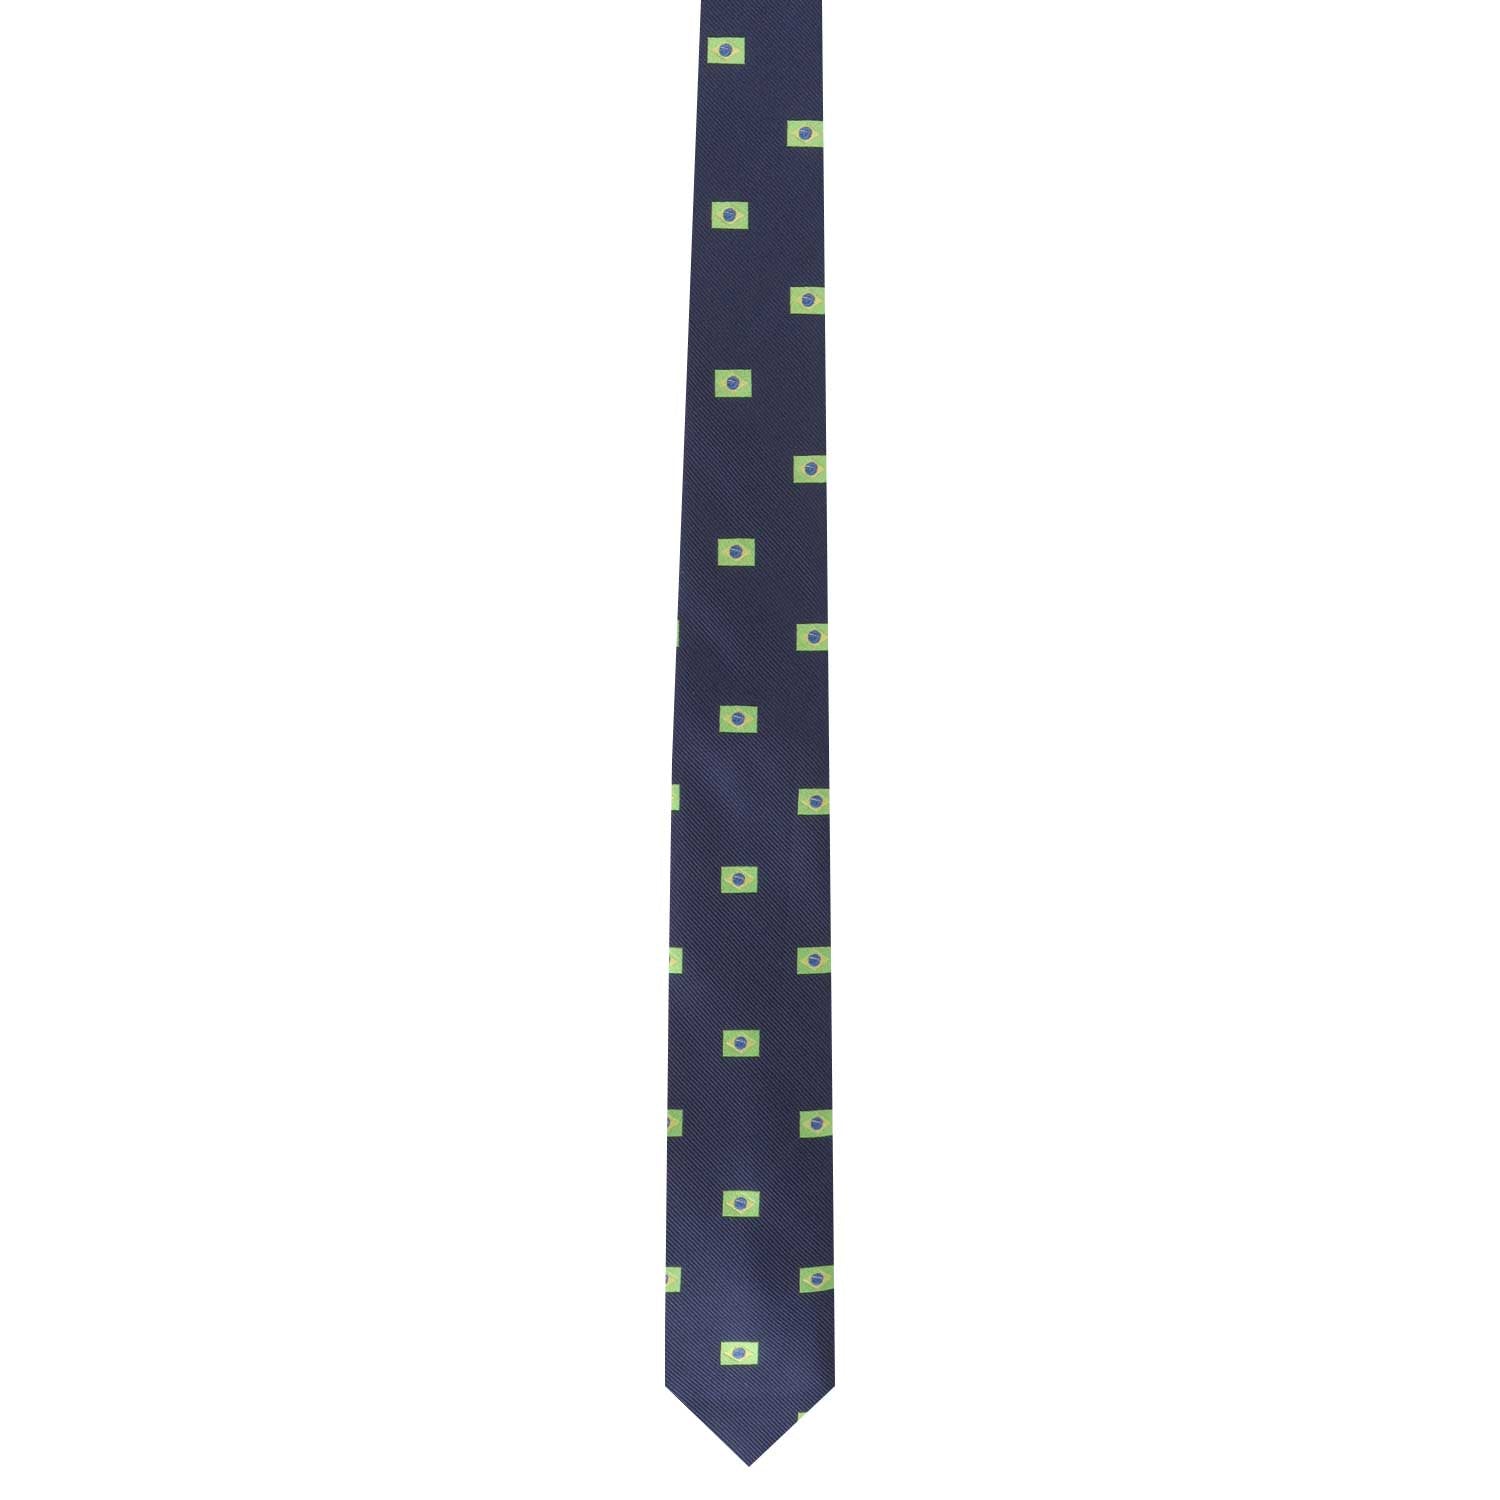 A Brazil Flag skinny tie with vibrant green squares on it.